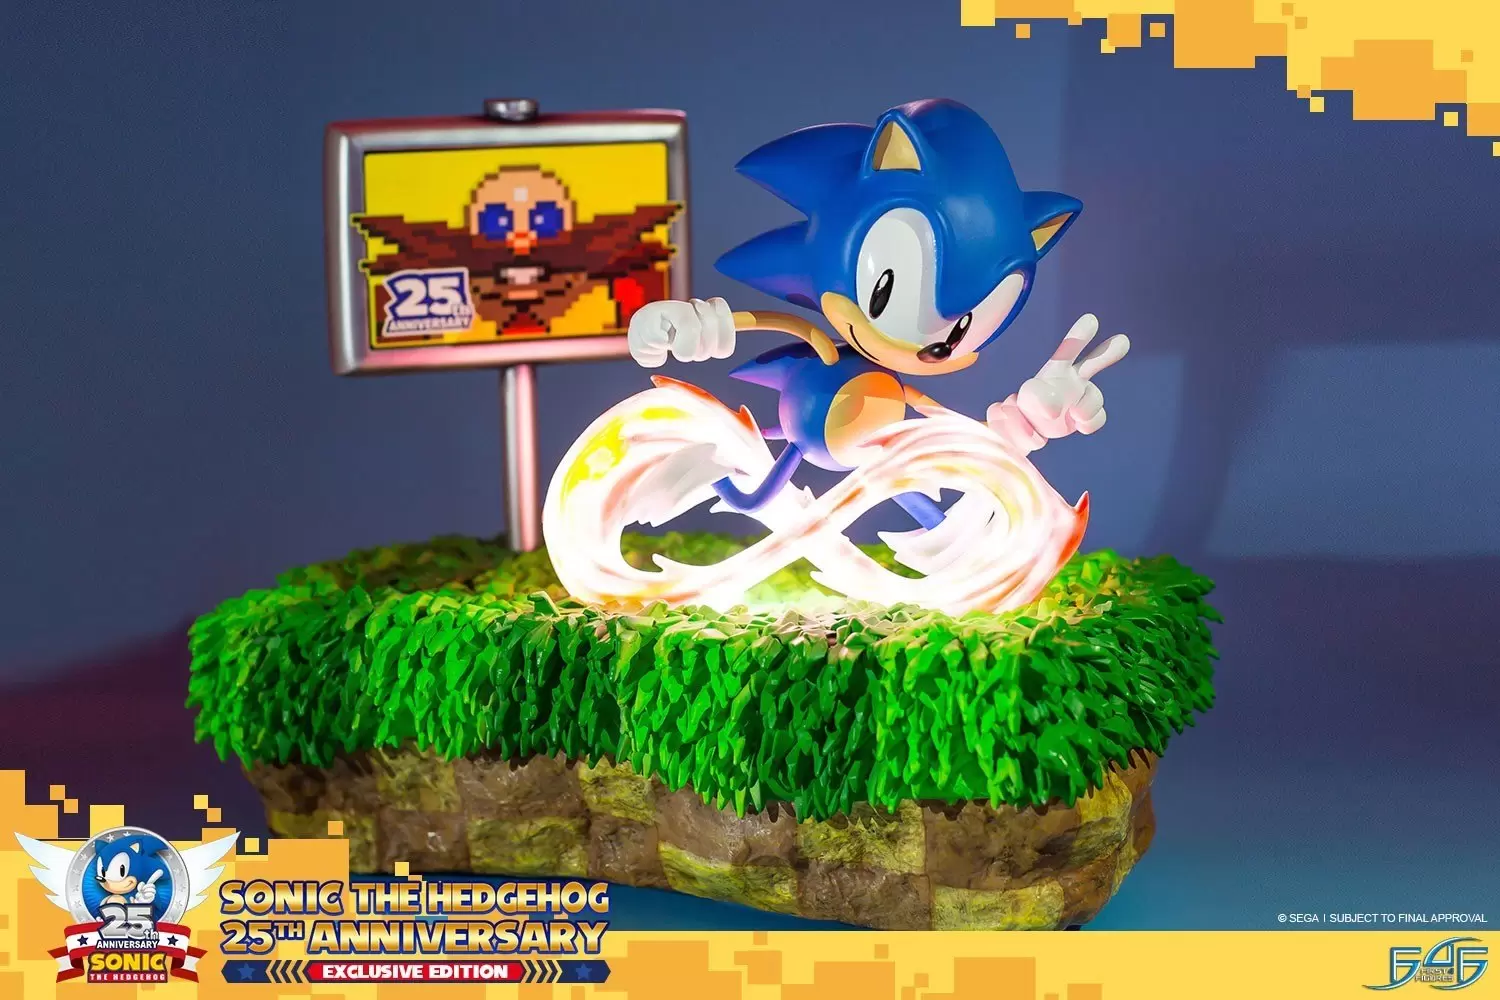 Sonic The Hedgehog 25th Anniversary (Exclusive) - First 4 Figures